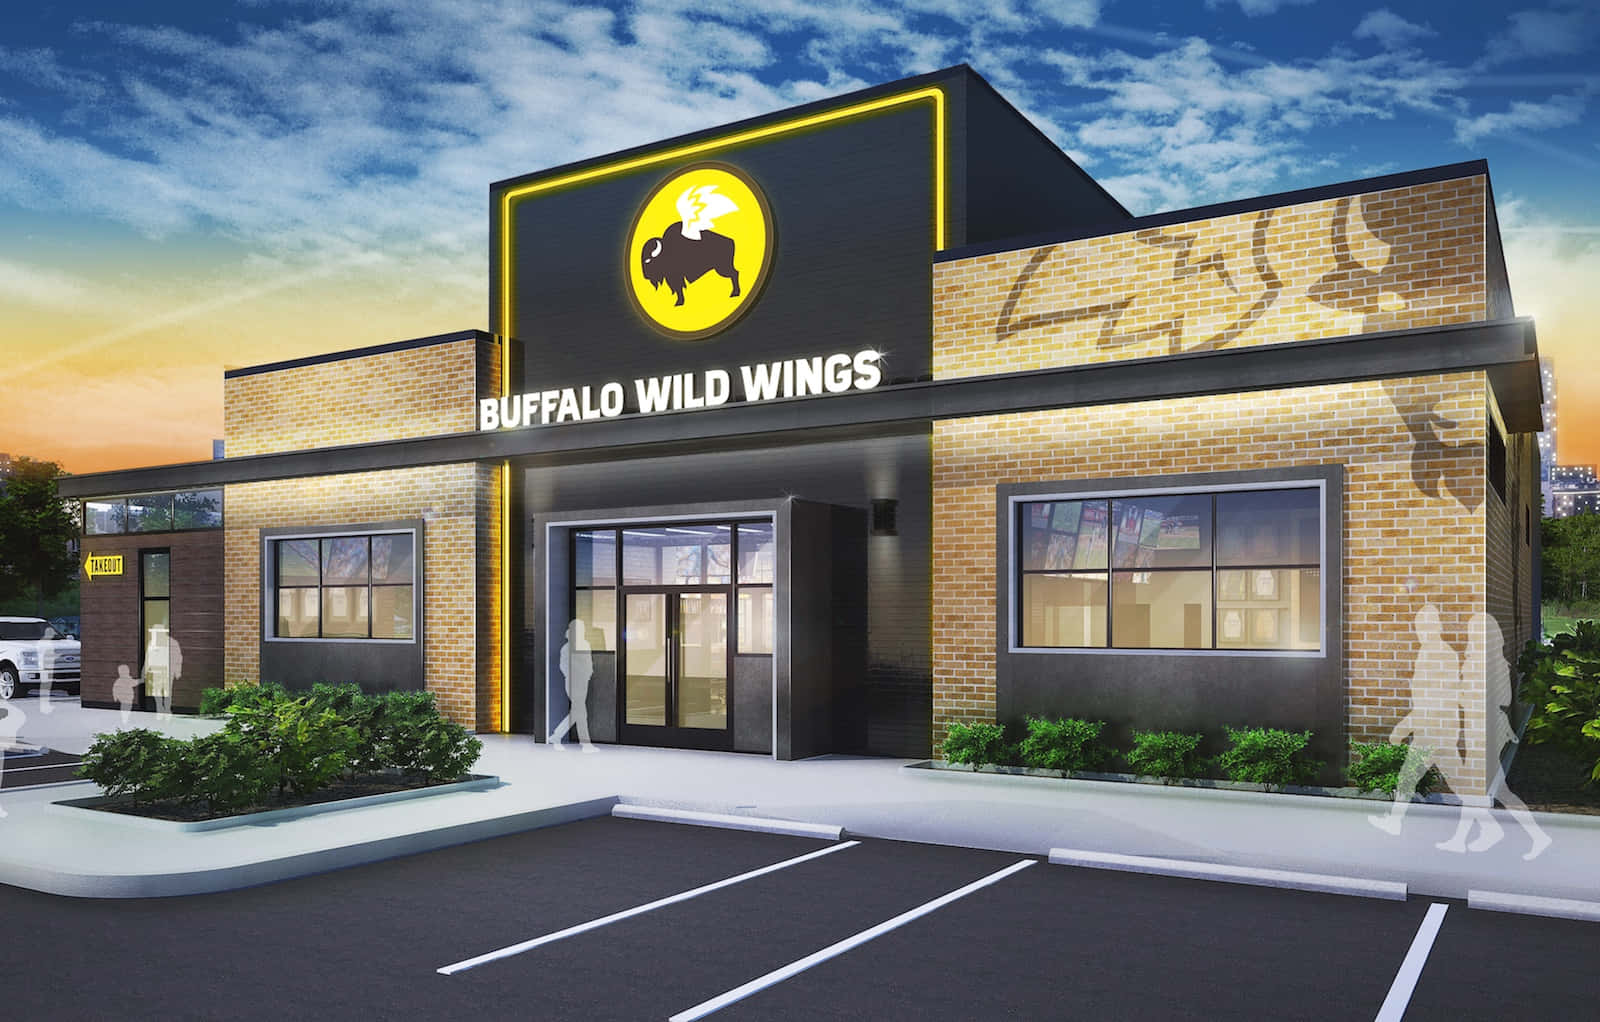 Get Ready to Experience an Unparalleled Wings-Eating Adventure